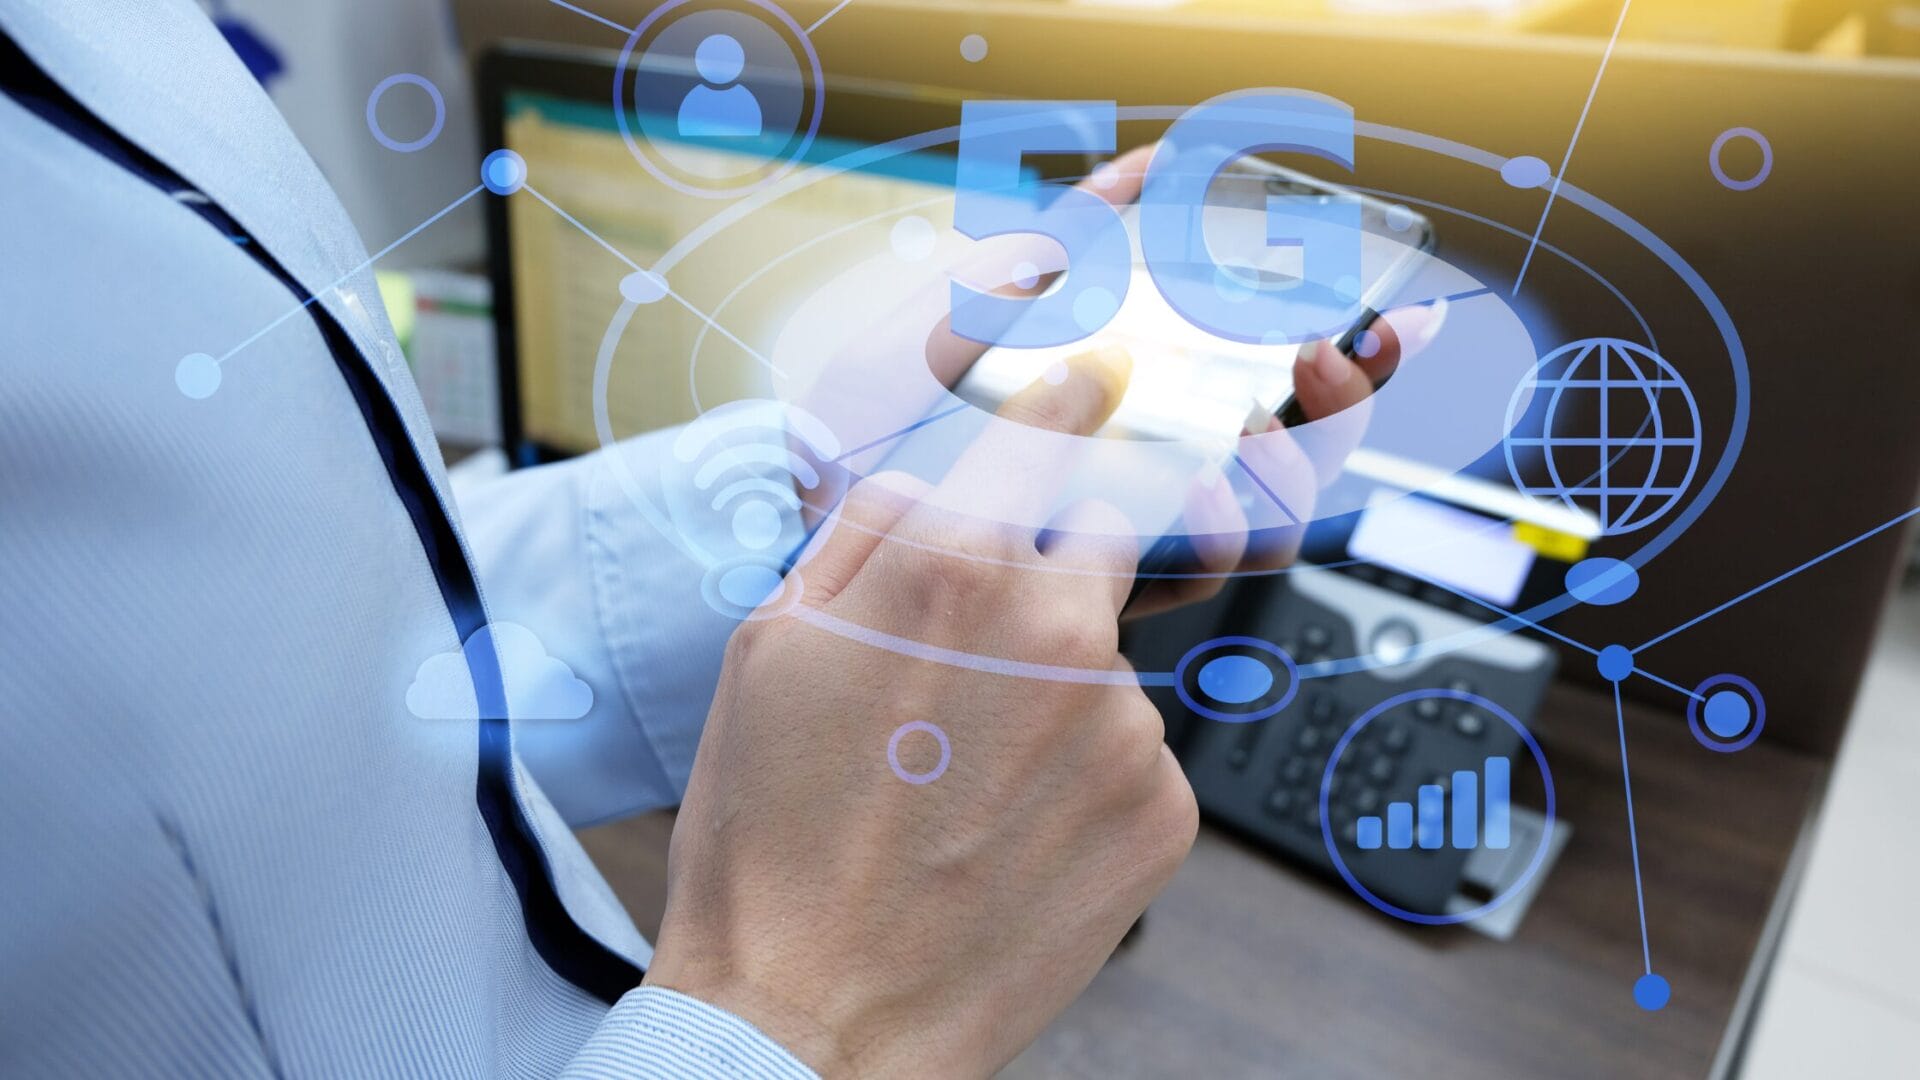 The Truth About 5G: Debunking the Hype and Dangers